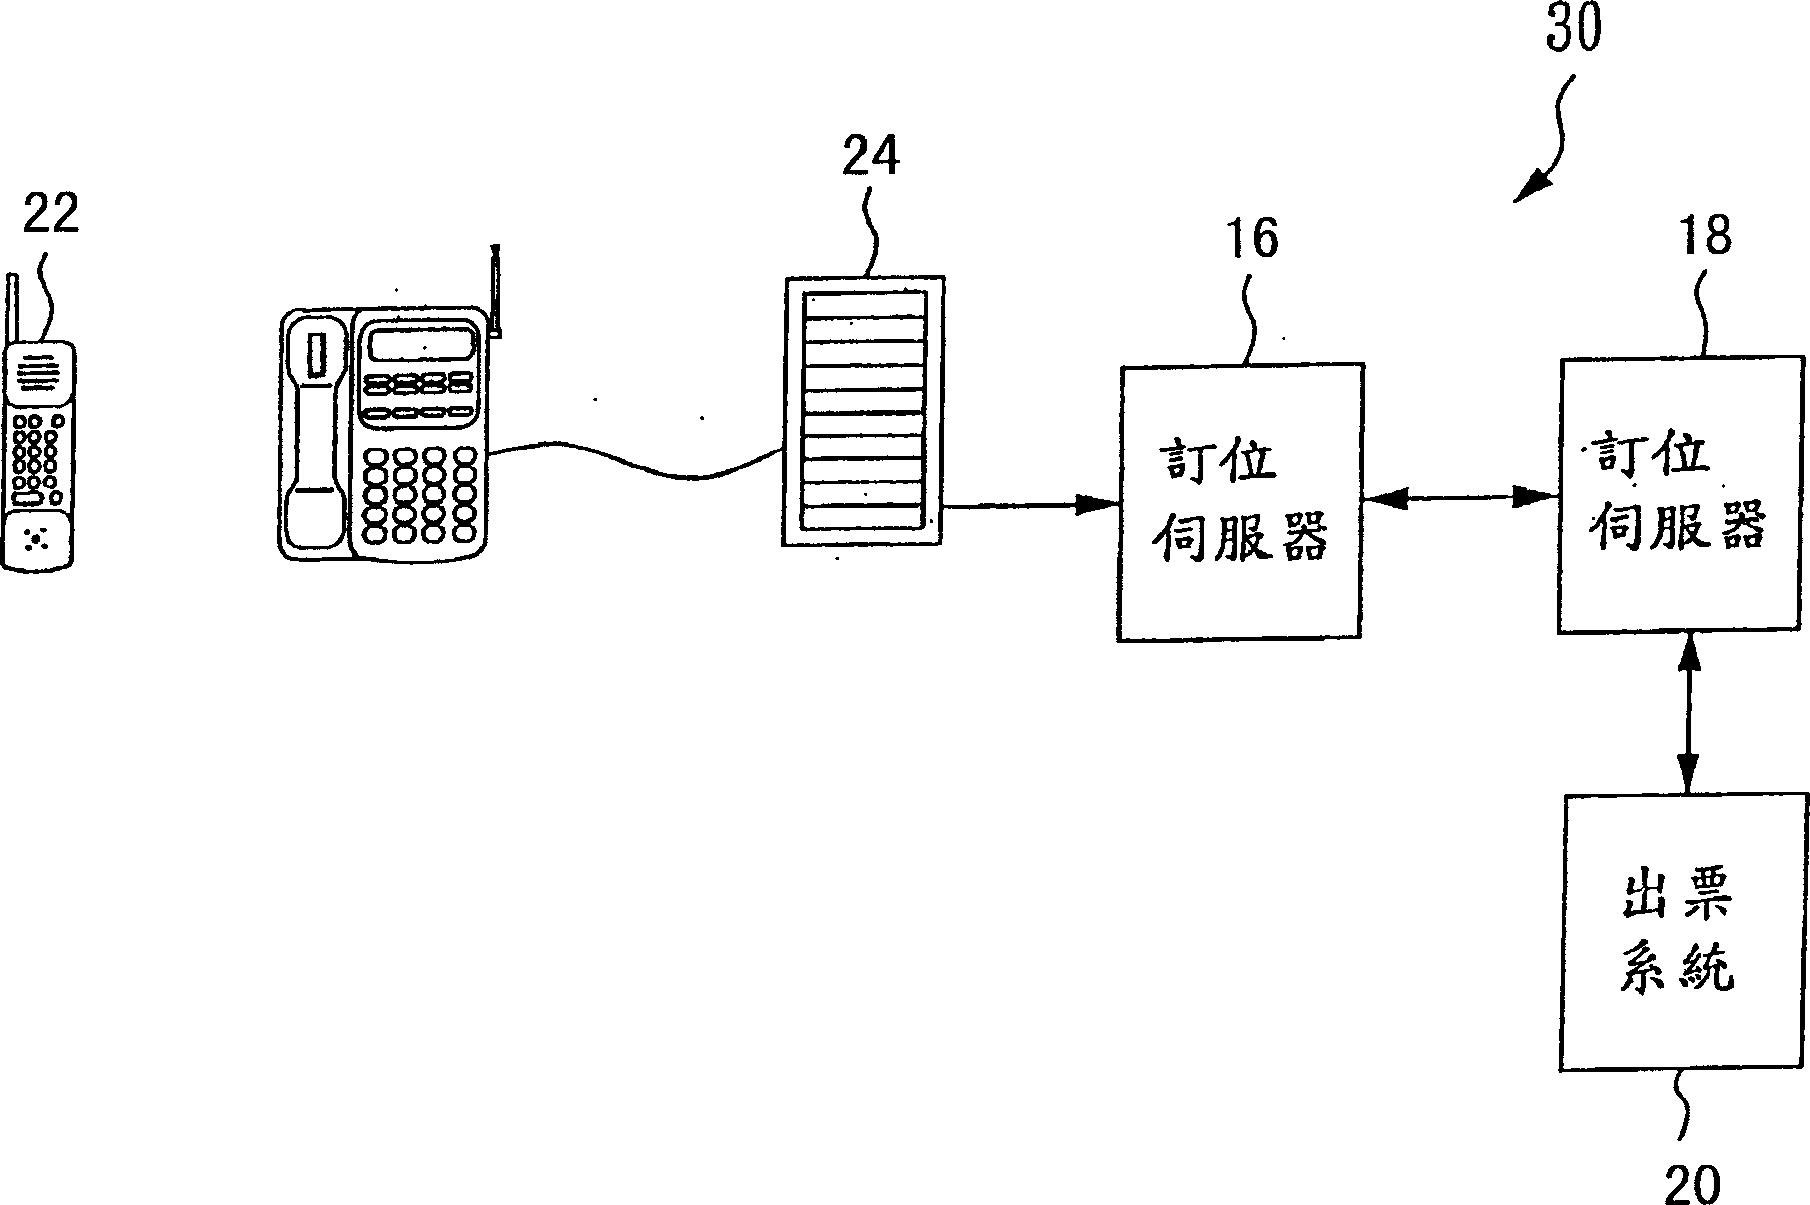 Method and system for immediate location using electronic file